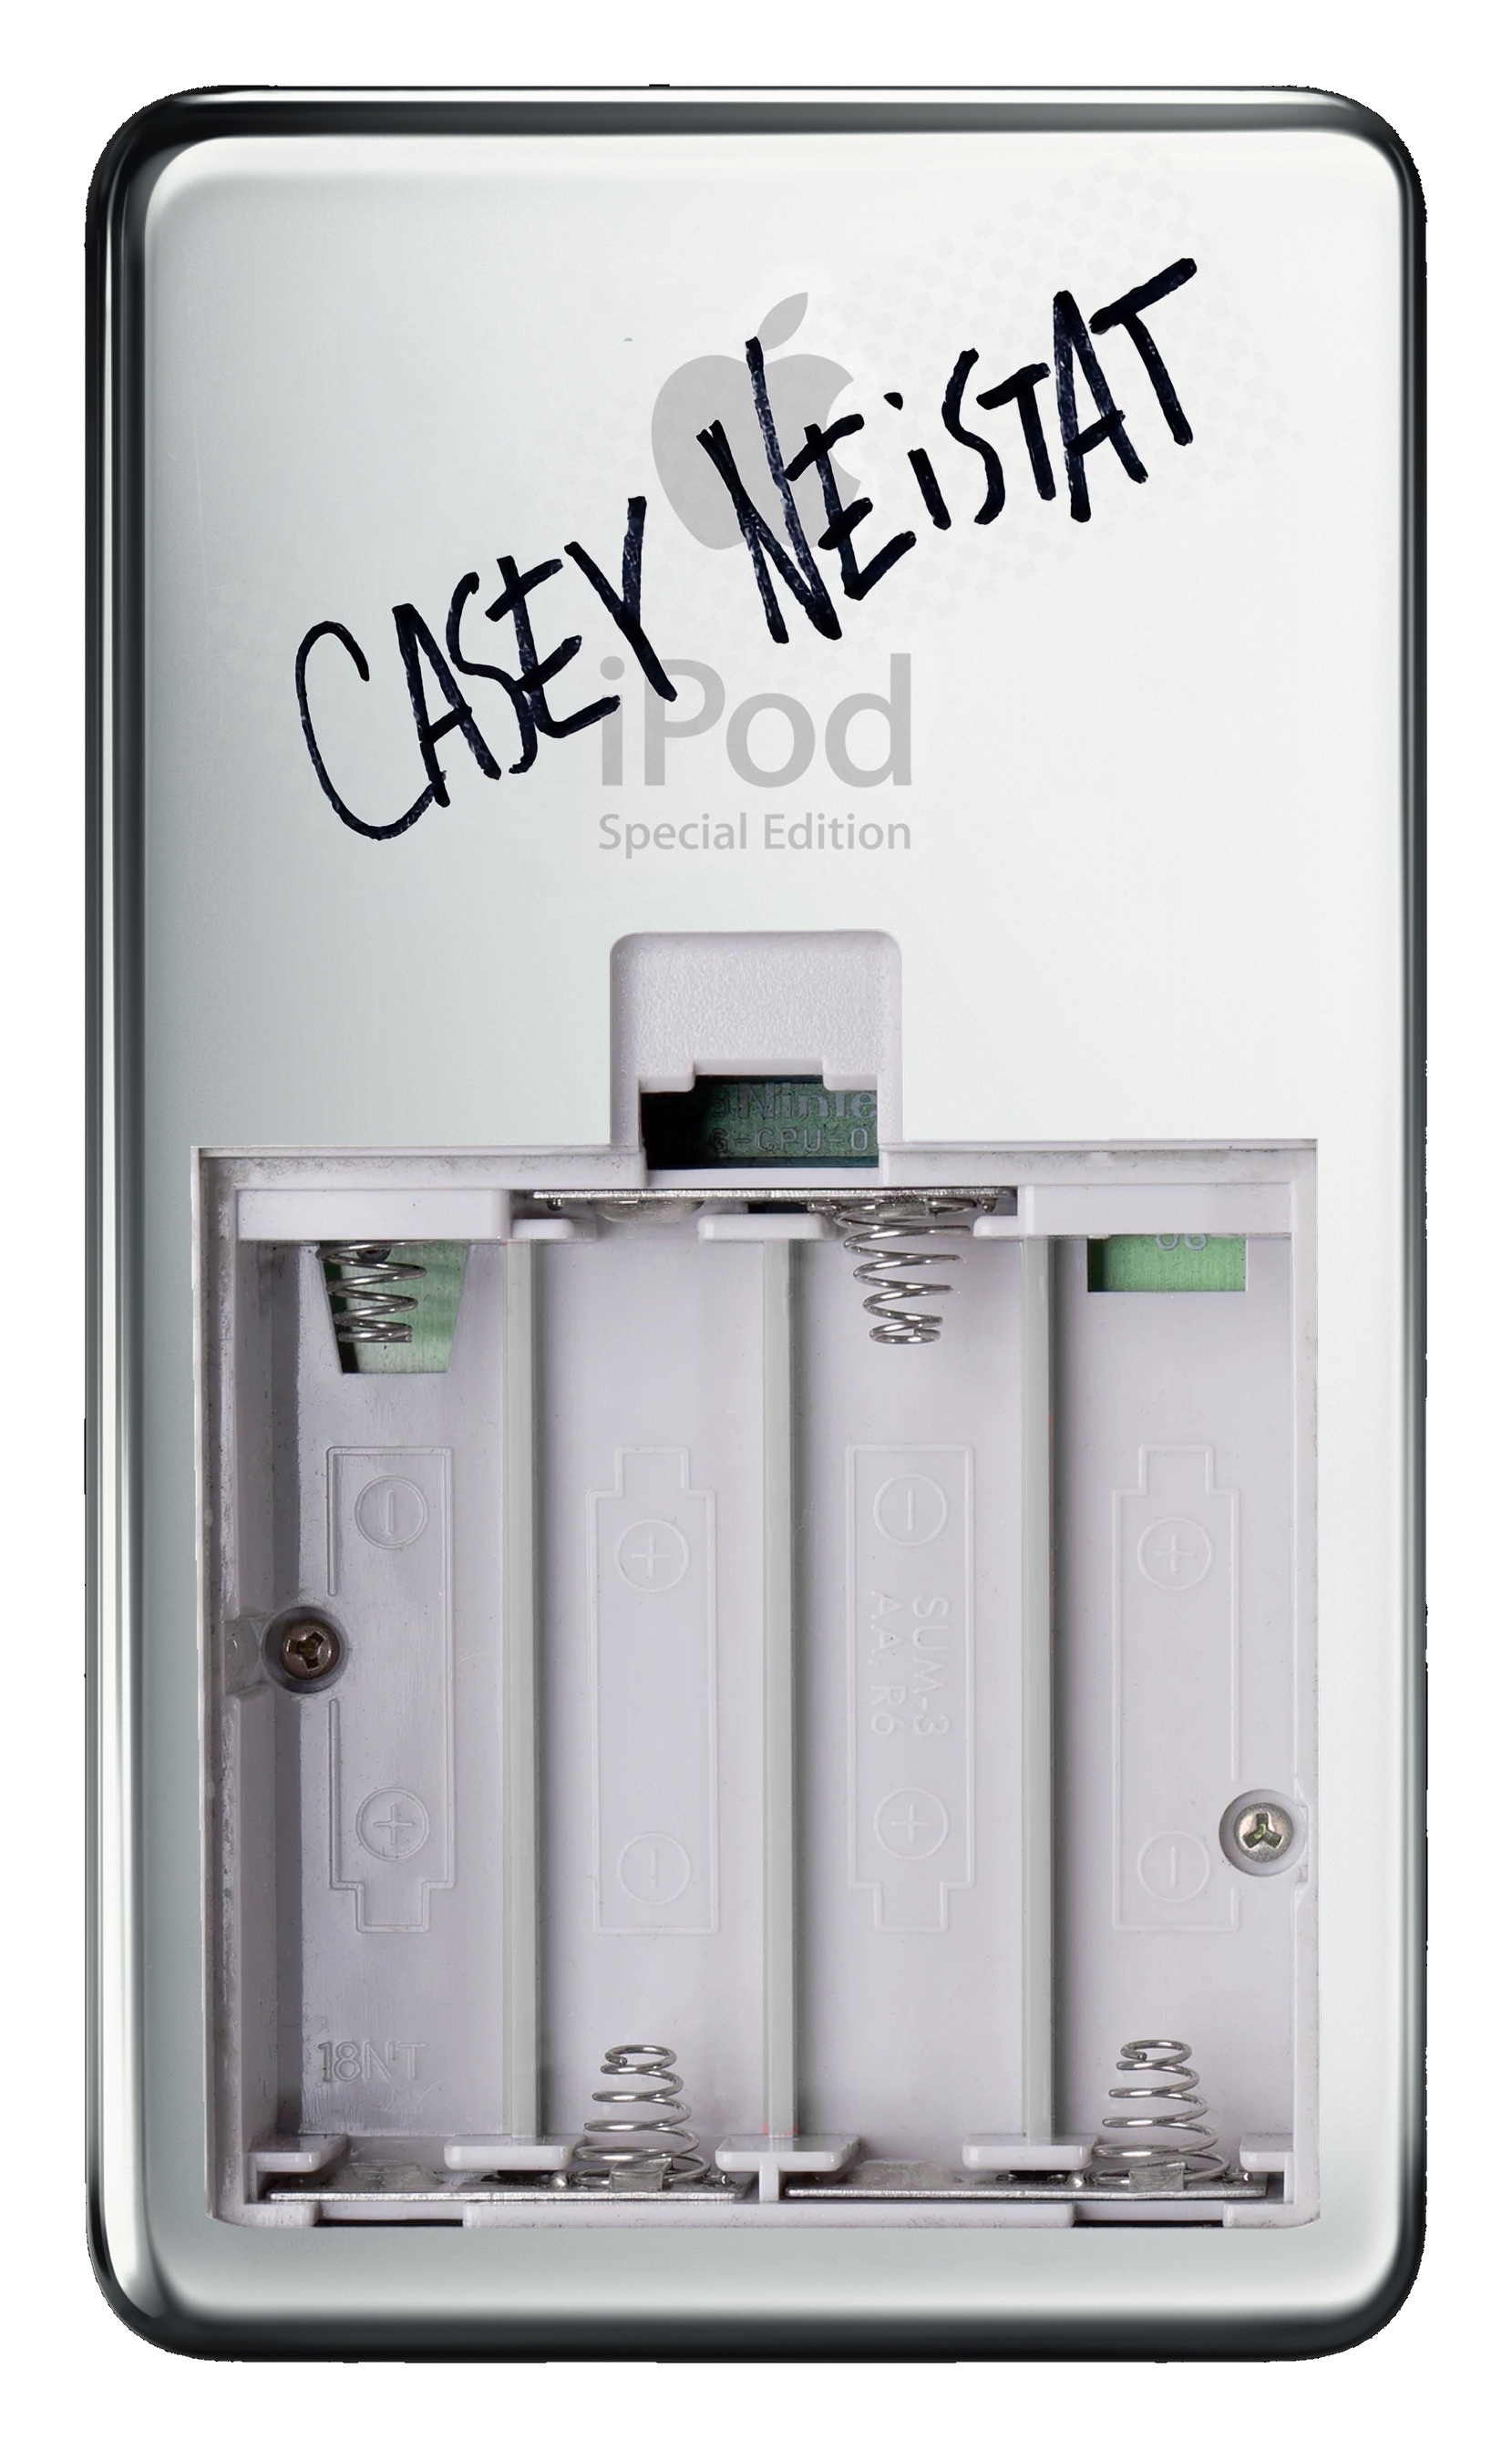 Casey Nesiat iPod “Special Edition” with quad AA battery compartment.